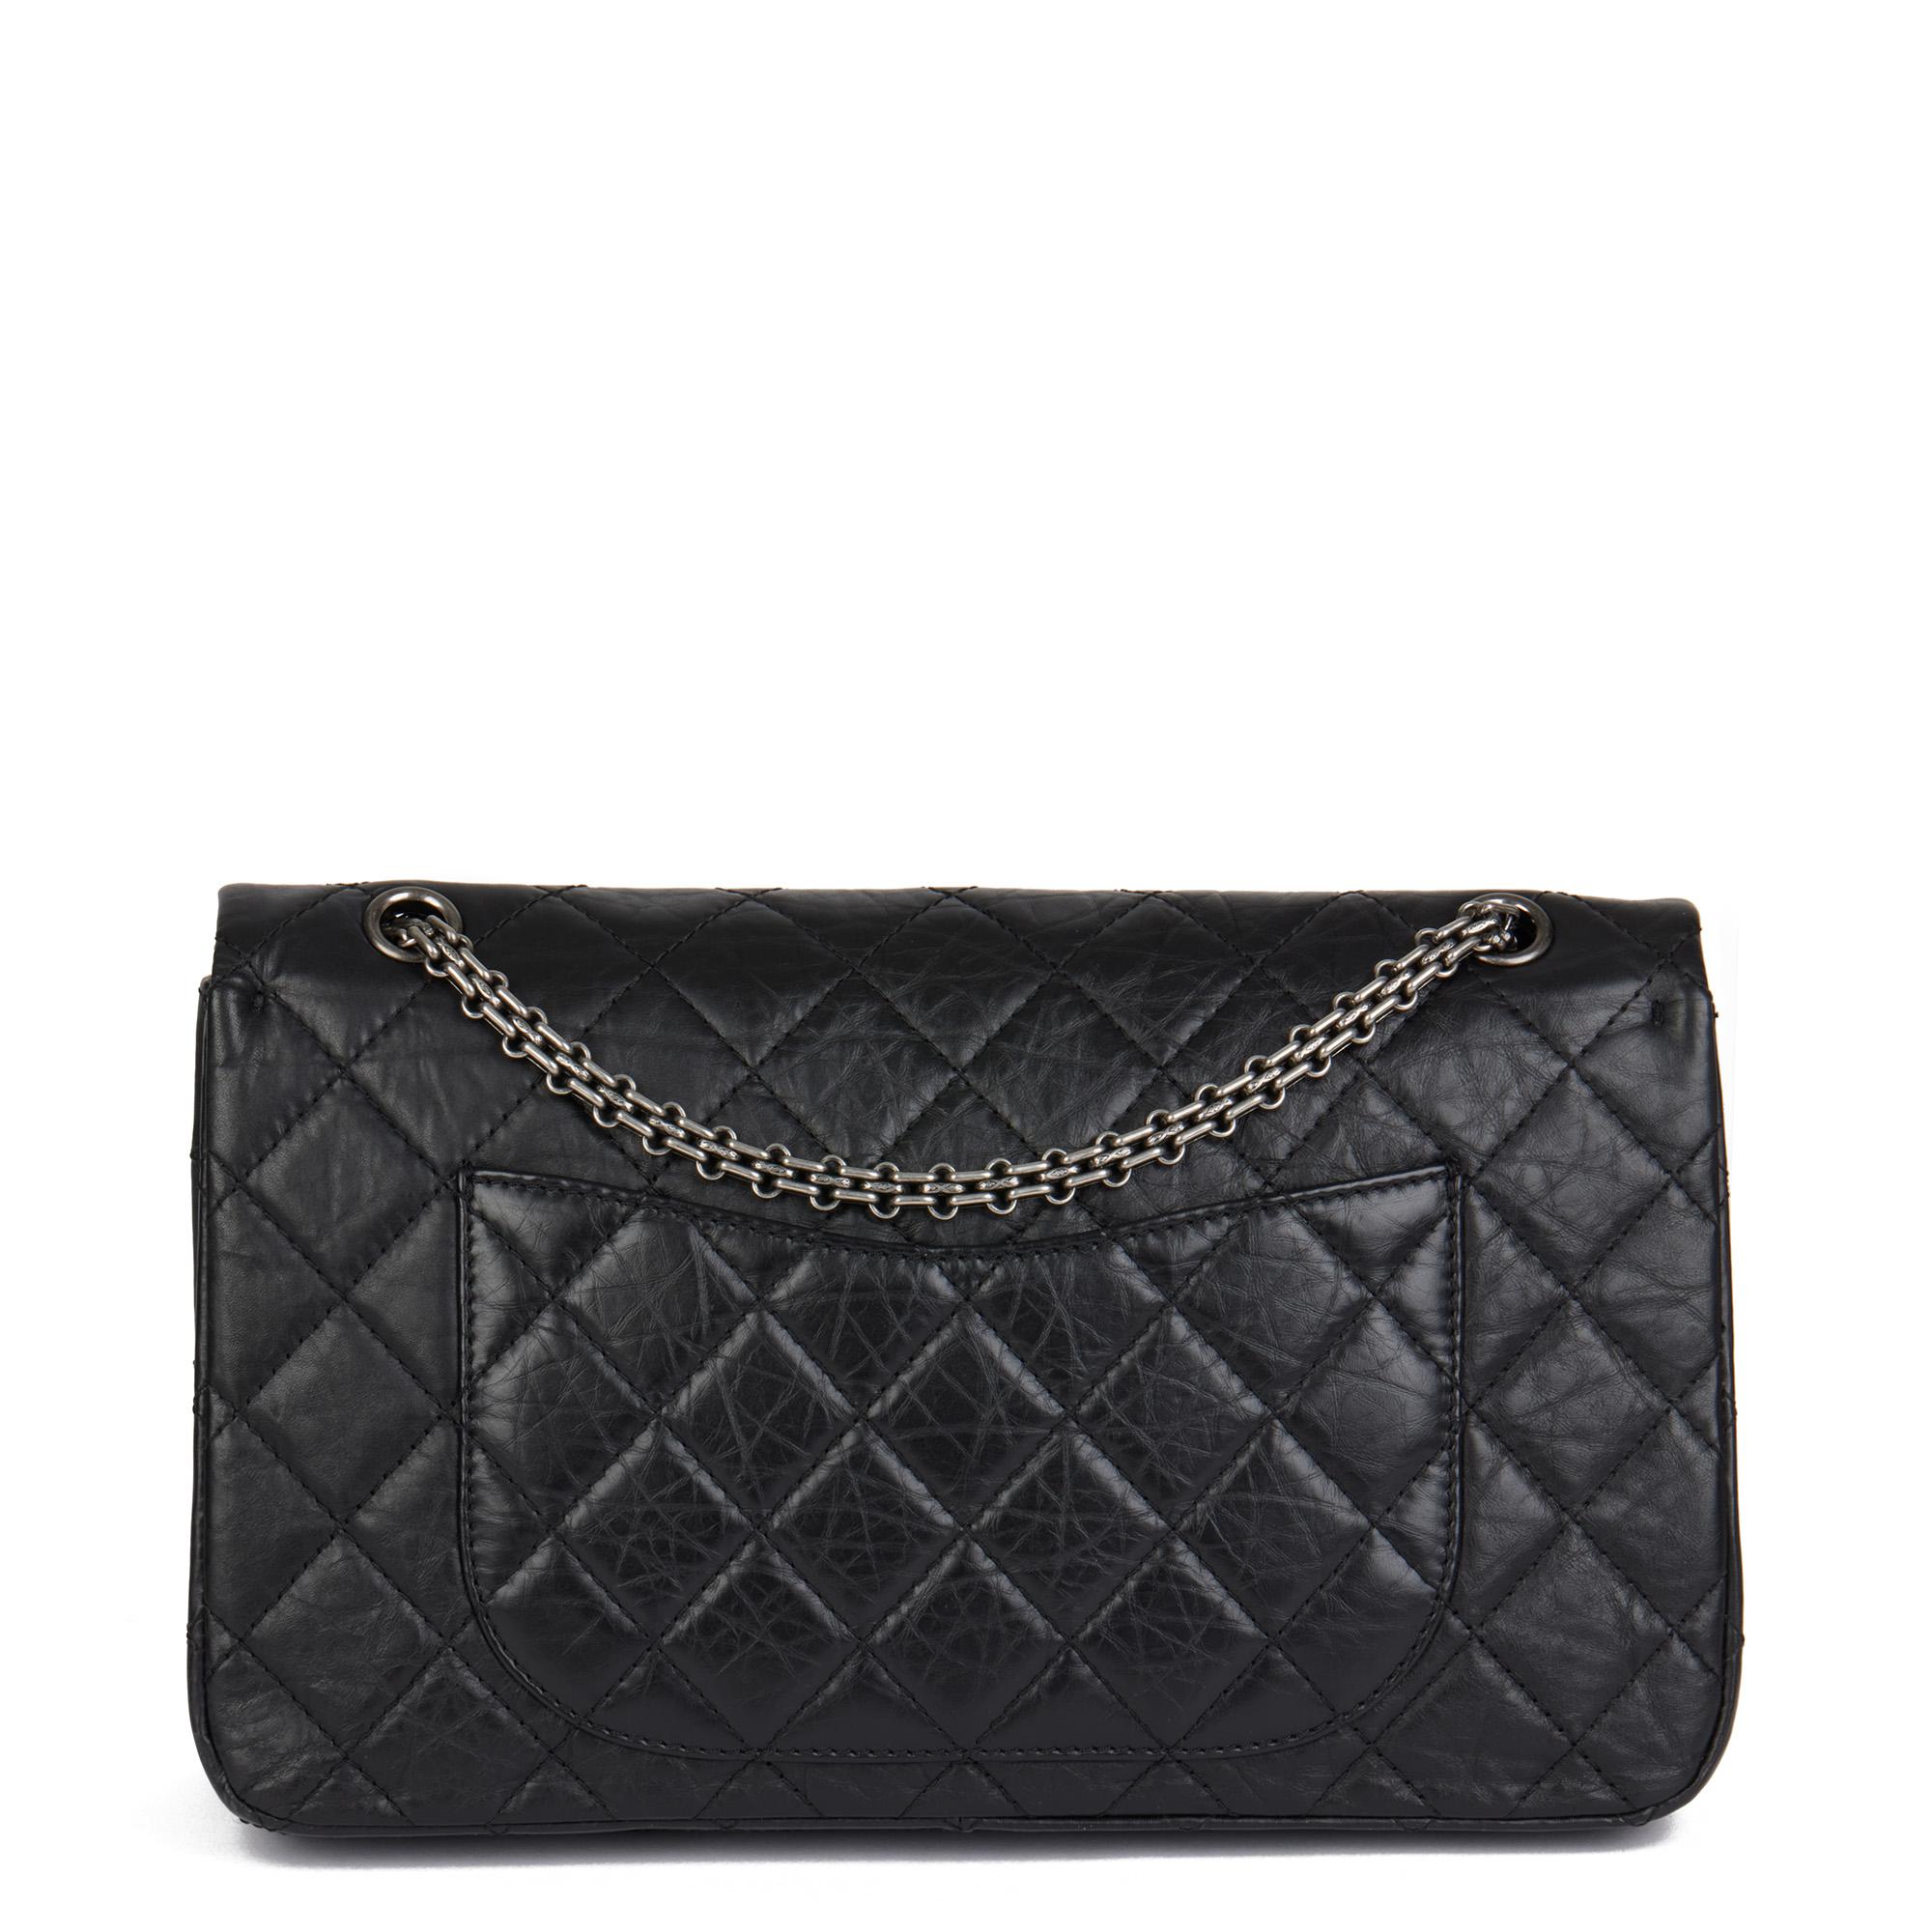 CHANEL Black Quilted Aged Calfskin leather 2.55 Reissue 227 Double Flap Bag 1